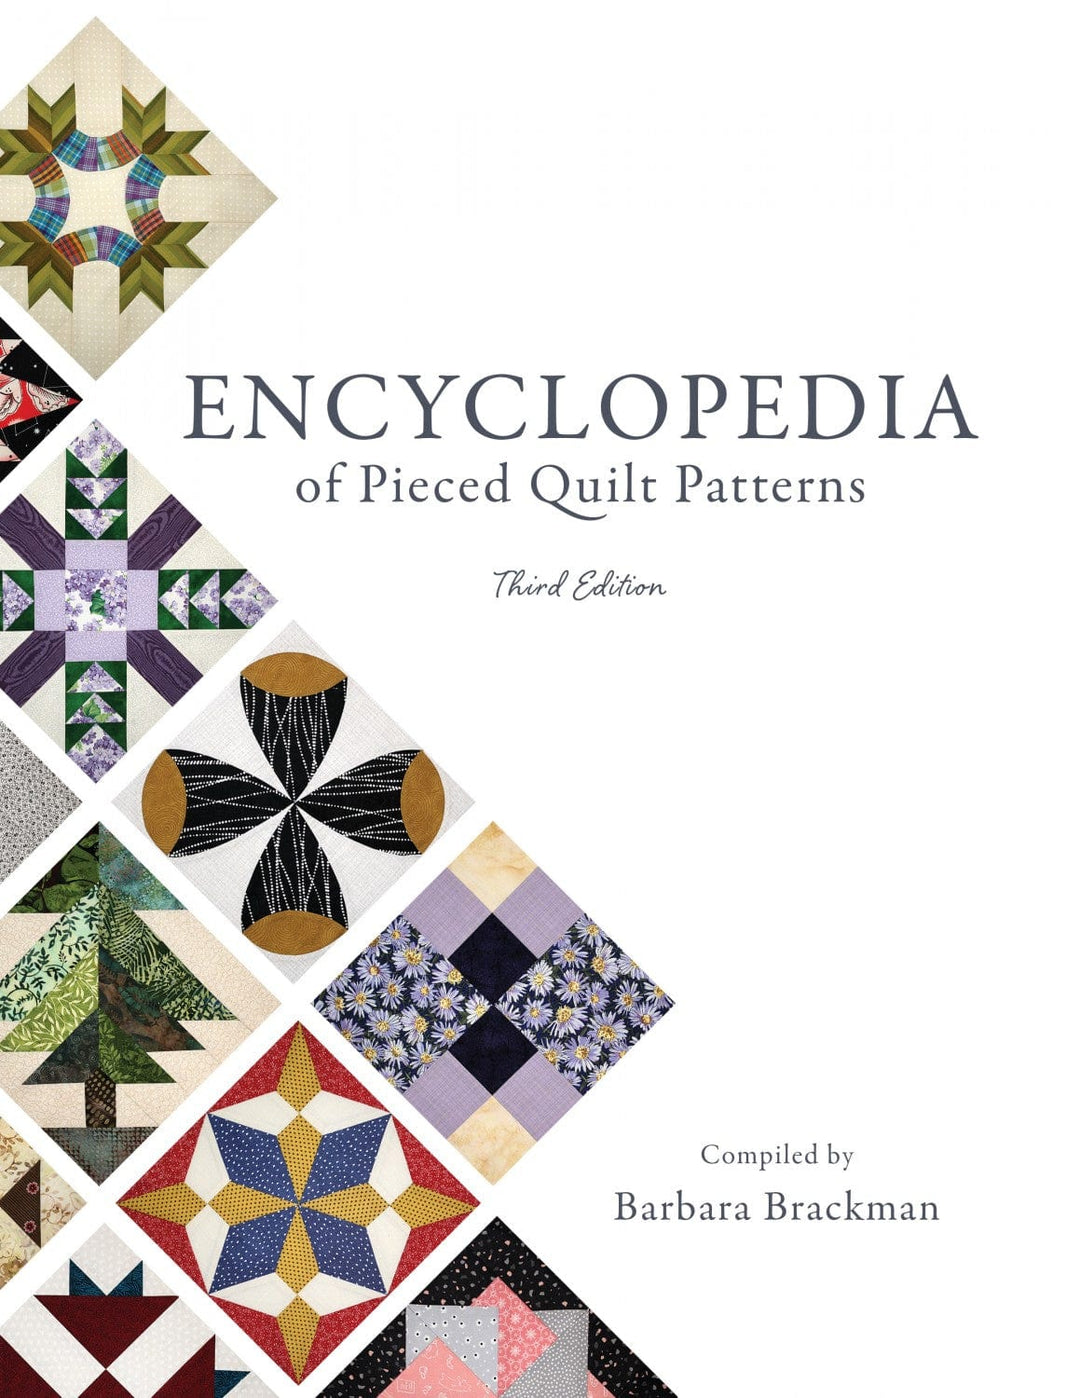 Encyclopedia of Pieced Quilt Patterns by Barbara Brackman